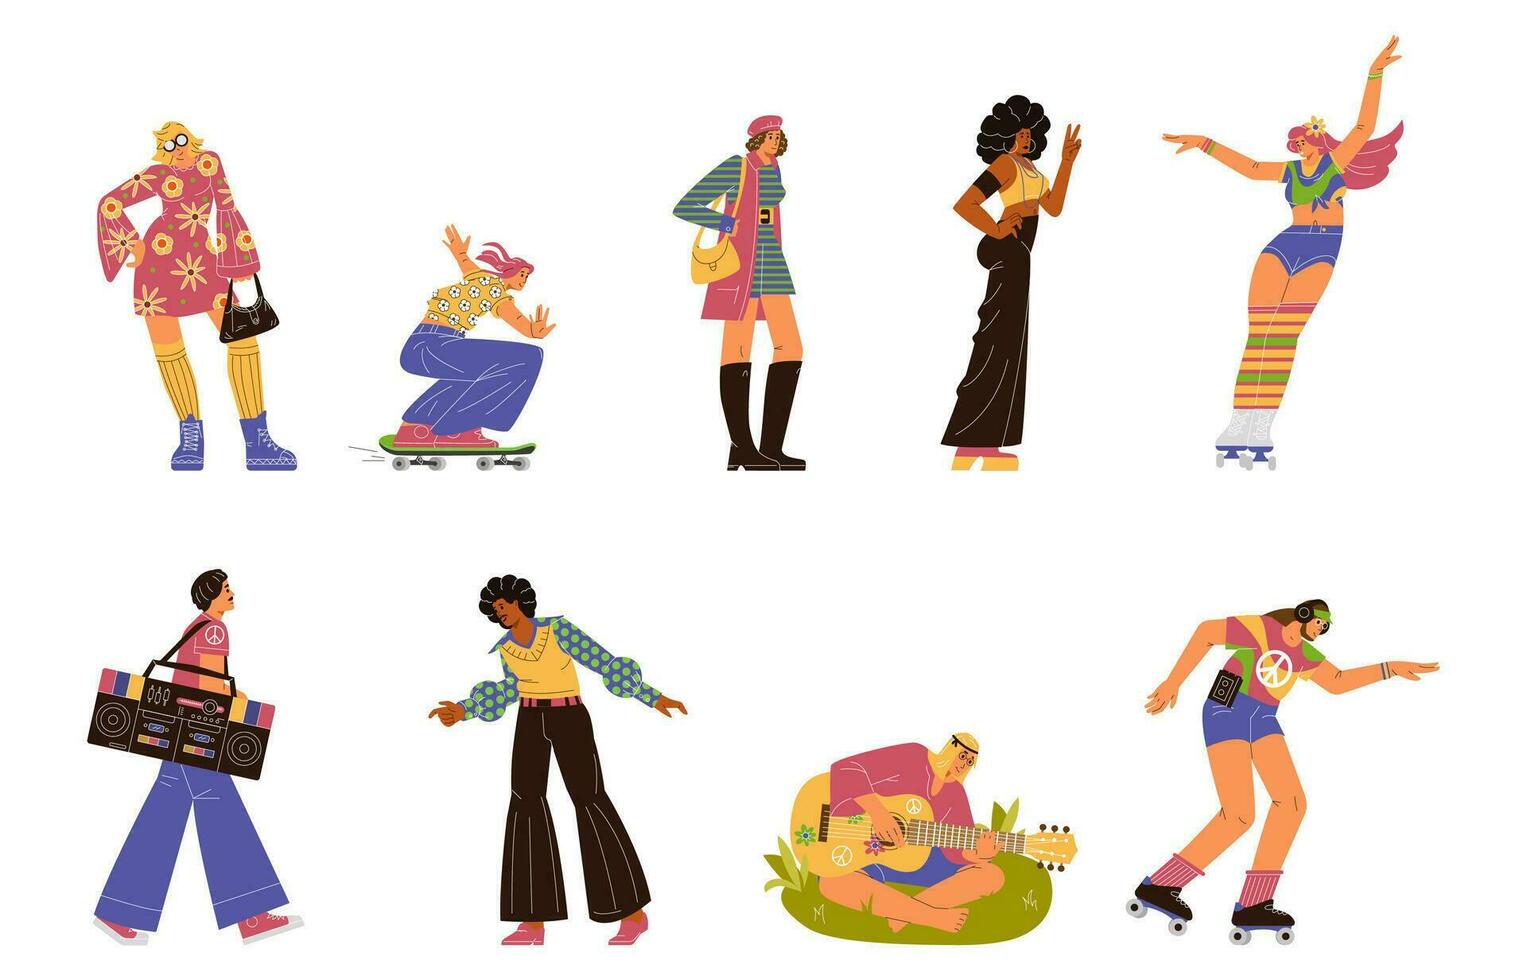 People from the 70s vector illustrations set. Men and women in retro clothes dancing disco, roller skating, playing guitar, skating. Fashion and culture of the 70s.